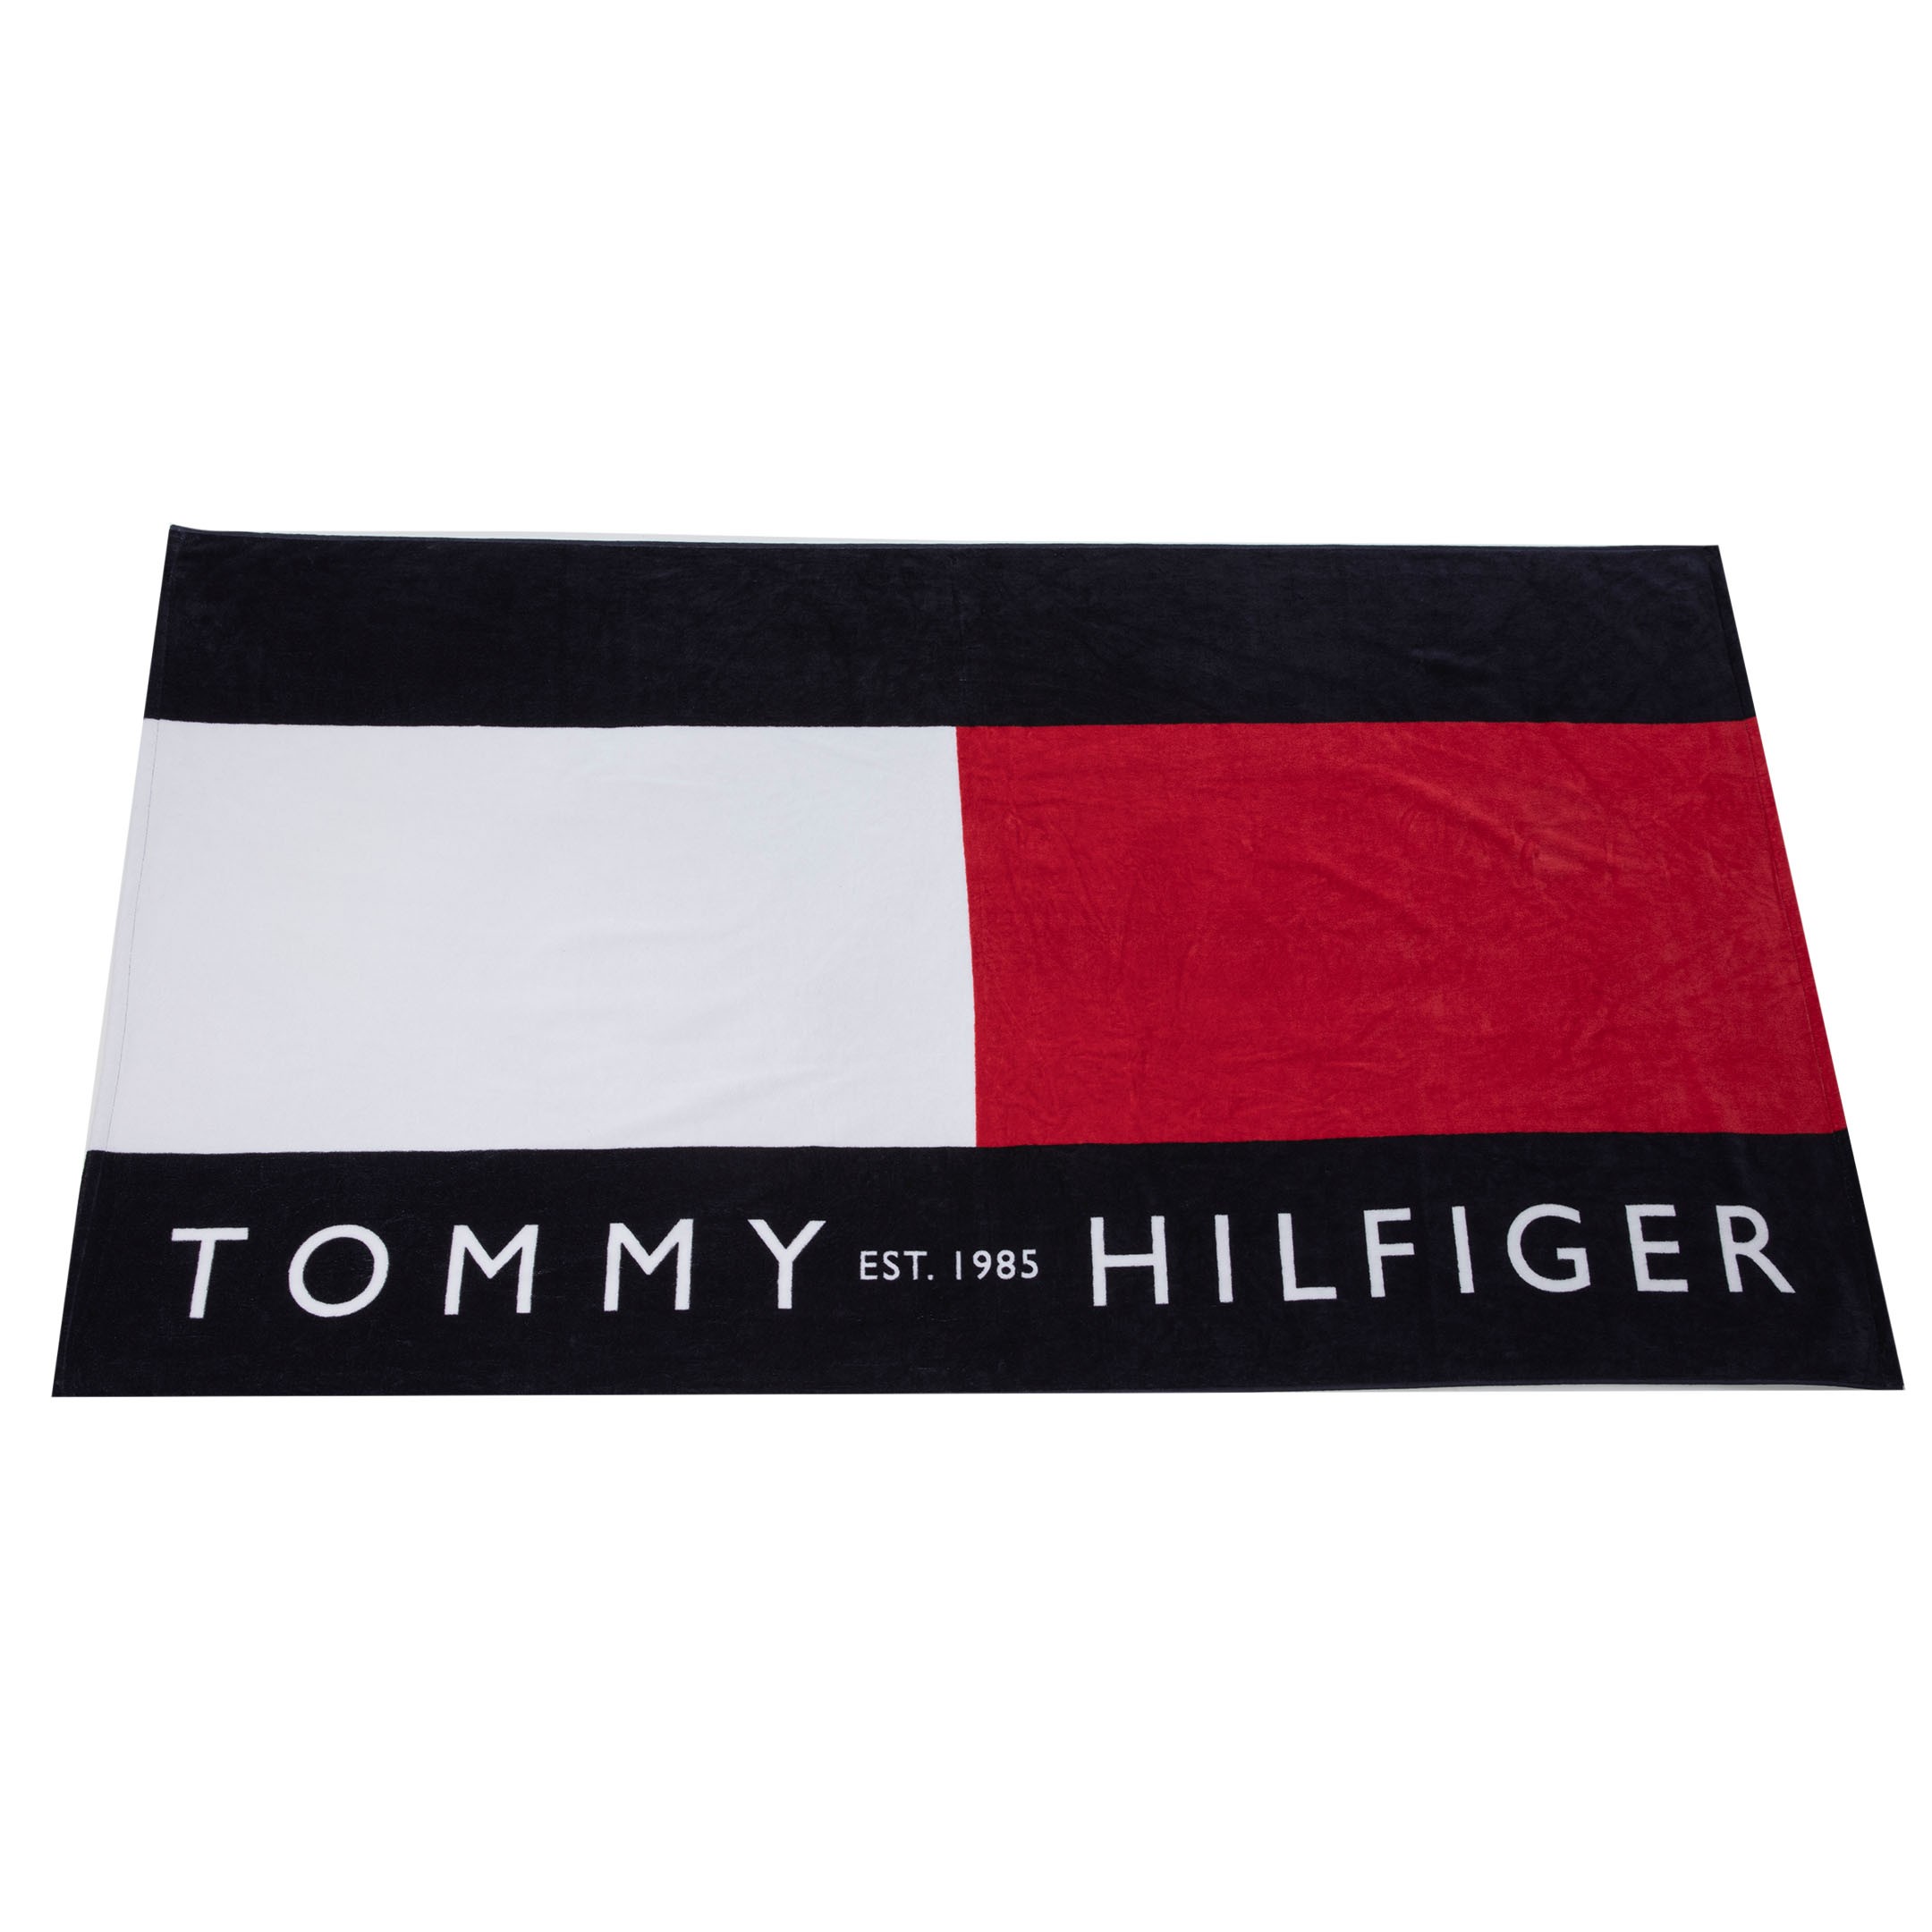 Tommy Hilfiger Flag Beach Towel - Navy - White - Red